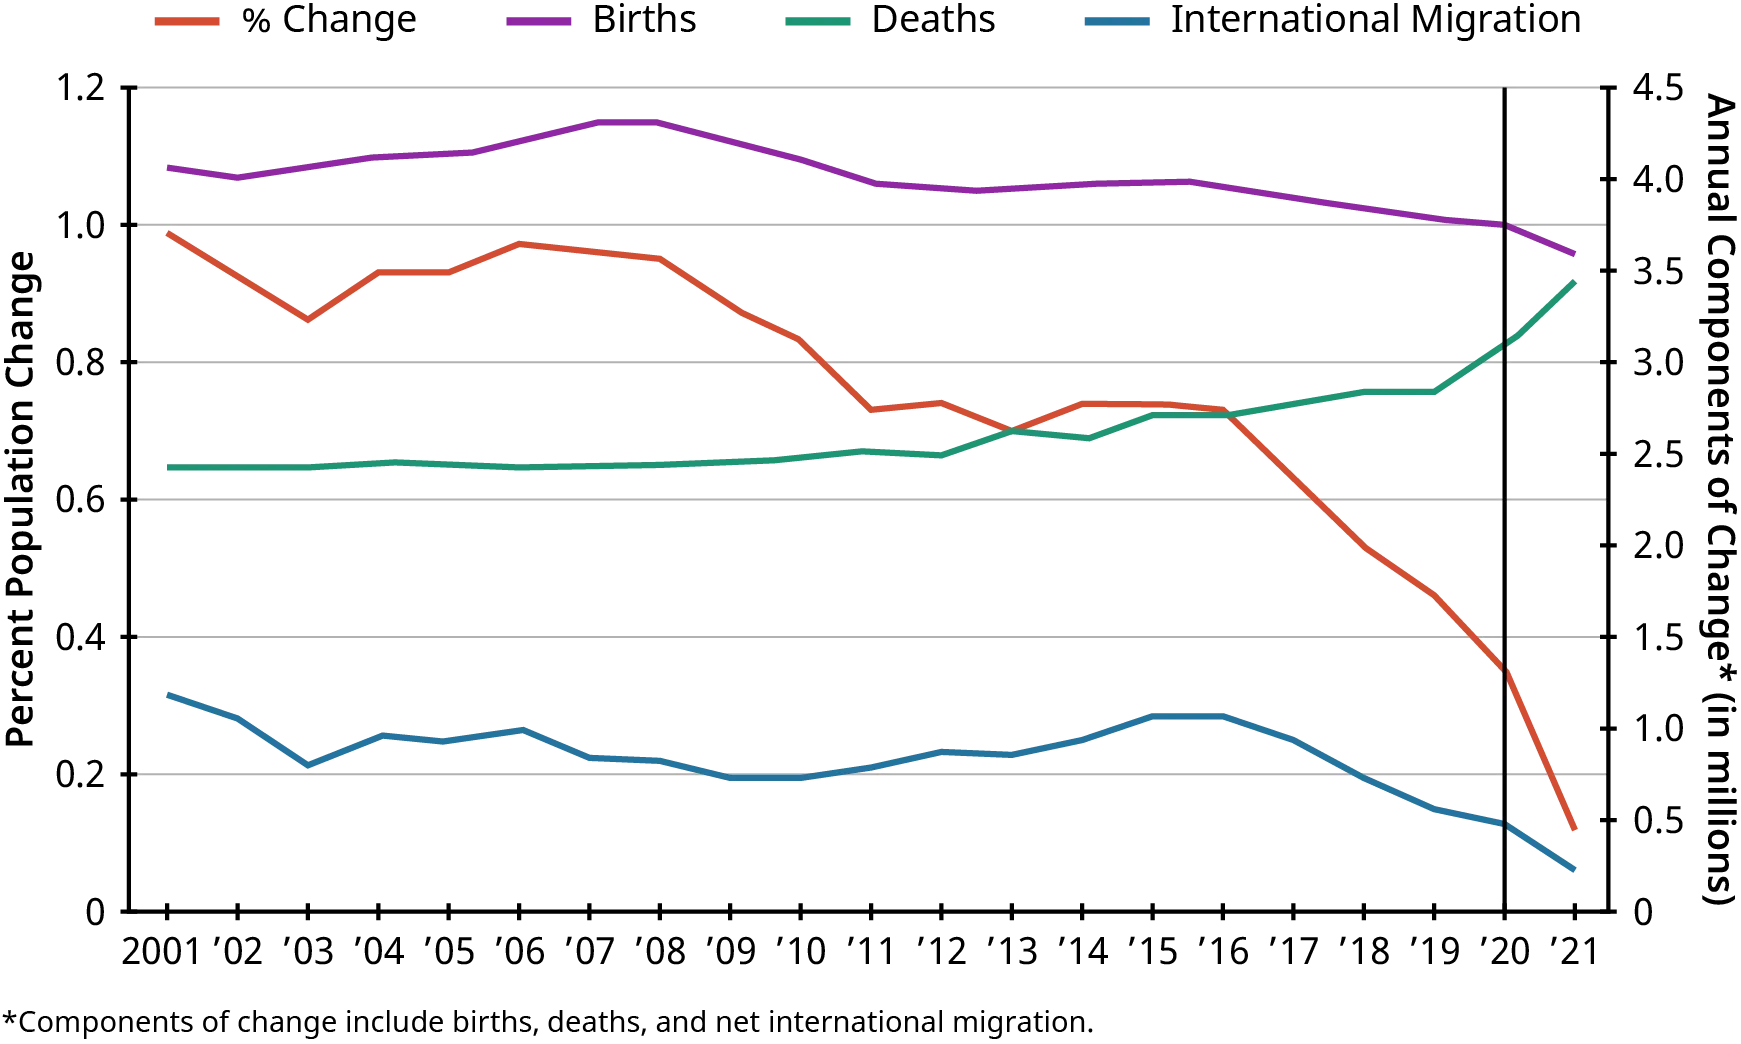 A line graph illustrates the population change and the components of that change, during the years 2001 through 2021. Between 2001 and 2021, The population declined approximately .9%. A sharp decline can be seen beginning in 2016, with an ever steeper decline in 2020. Births remained relatively flat, starting at about 4 million. In 2008, there were about 4.4 million births. A small, steady decline begins after that; by 2021 births were at about 3.9 million. Deaths remain flat at 2.6 million between 2001 and 2012. Deaths begin gradually rising after that; in 2021 there were just under 3.5 million deaths. International migration is approximately 1.2 million in 2001, declining to .75 million in 2003. In 2015 and 2016 international migration reaches 1 million, before declining. By 2021, international migration is approximately .2 million.